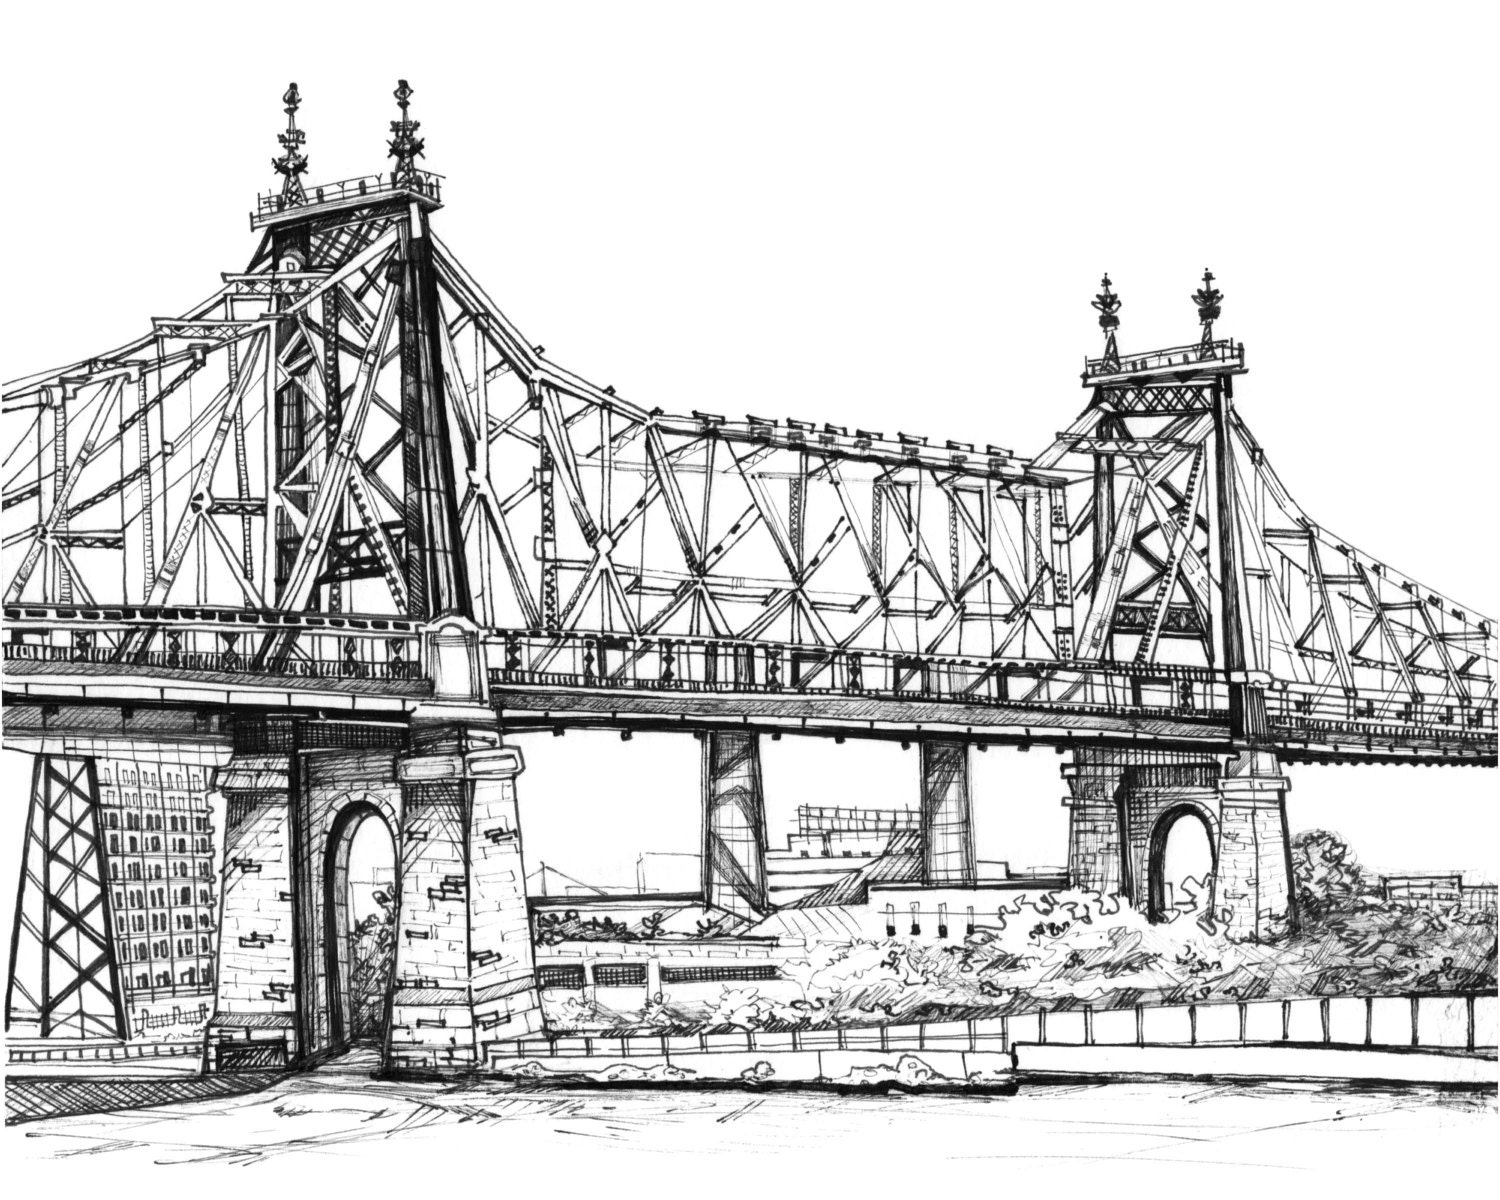 Cute Drawings Or Sketches Cities And Bridges for Adult